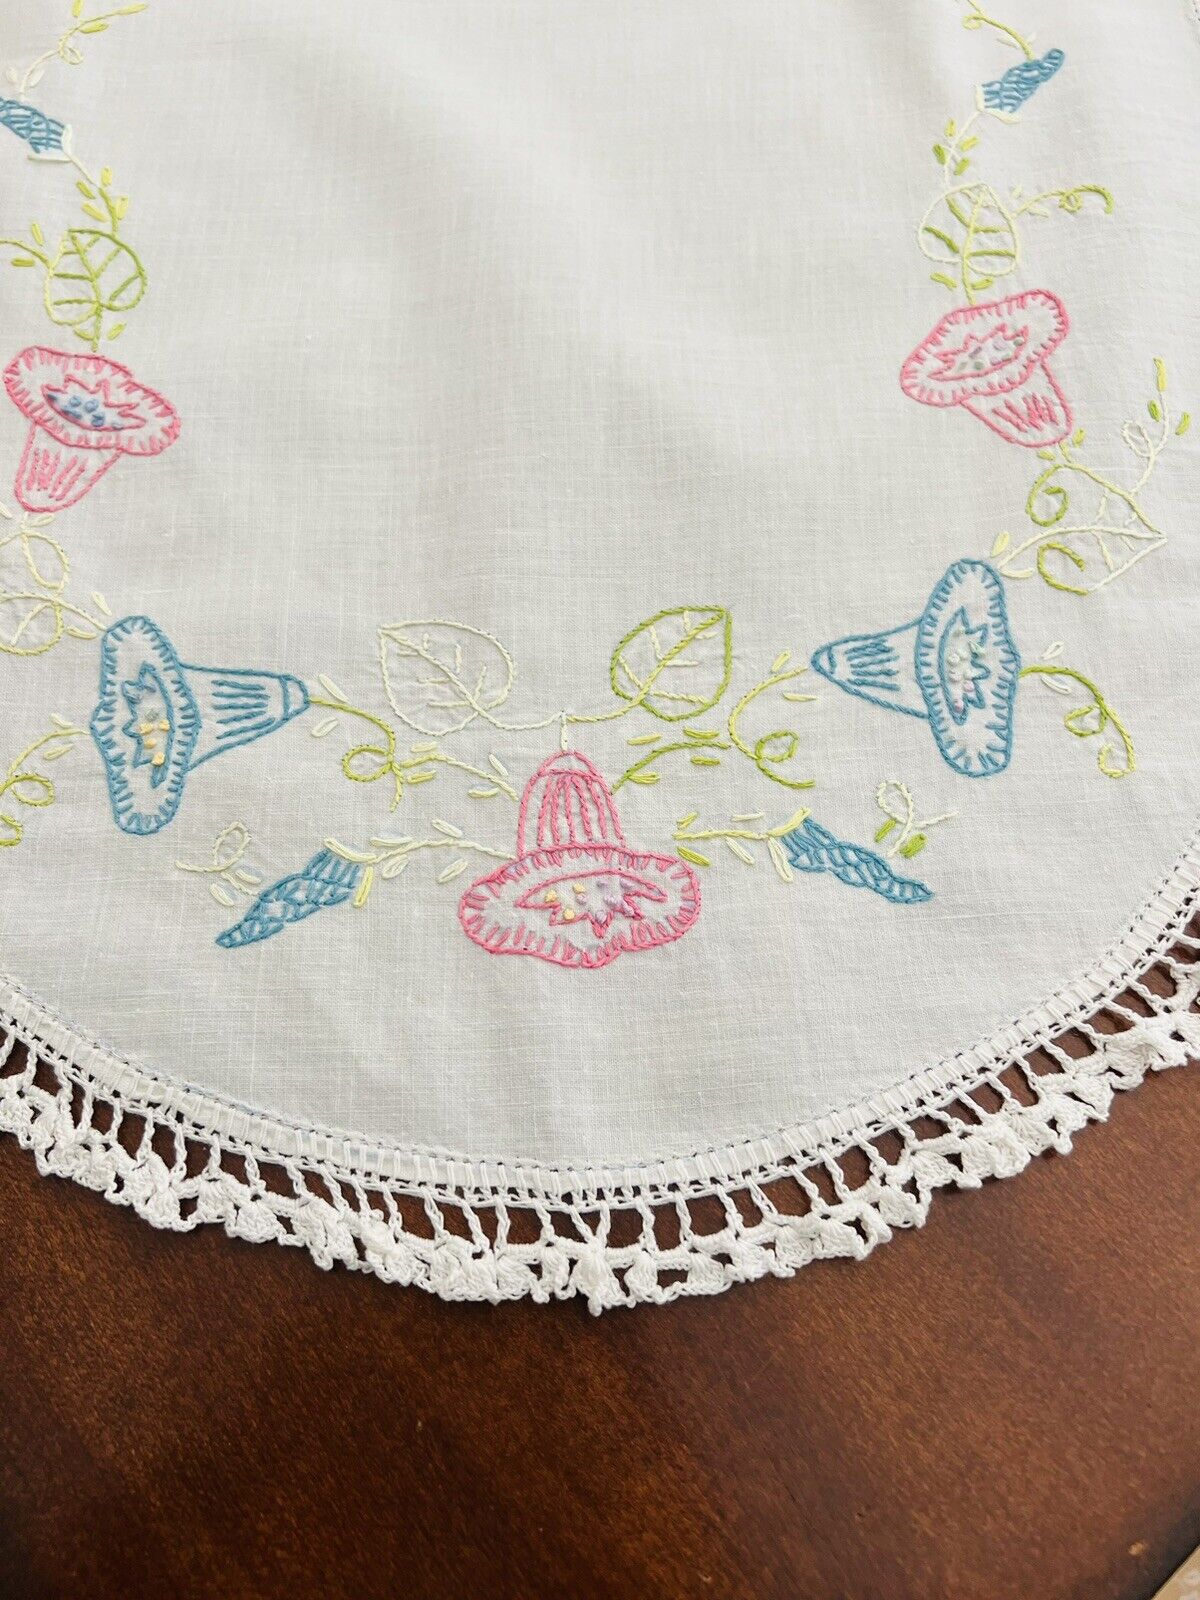 Vintage hand embroidered and hand crocheted table runner morning glory flowers